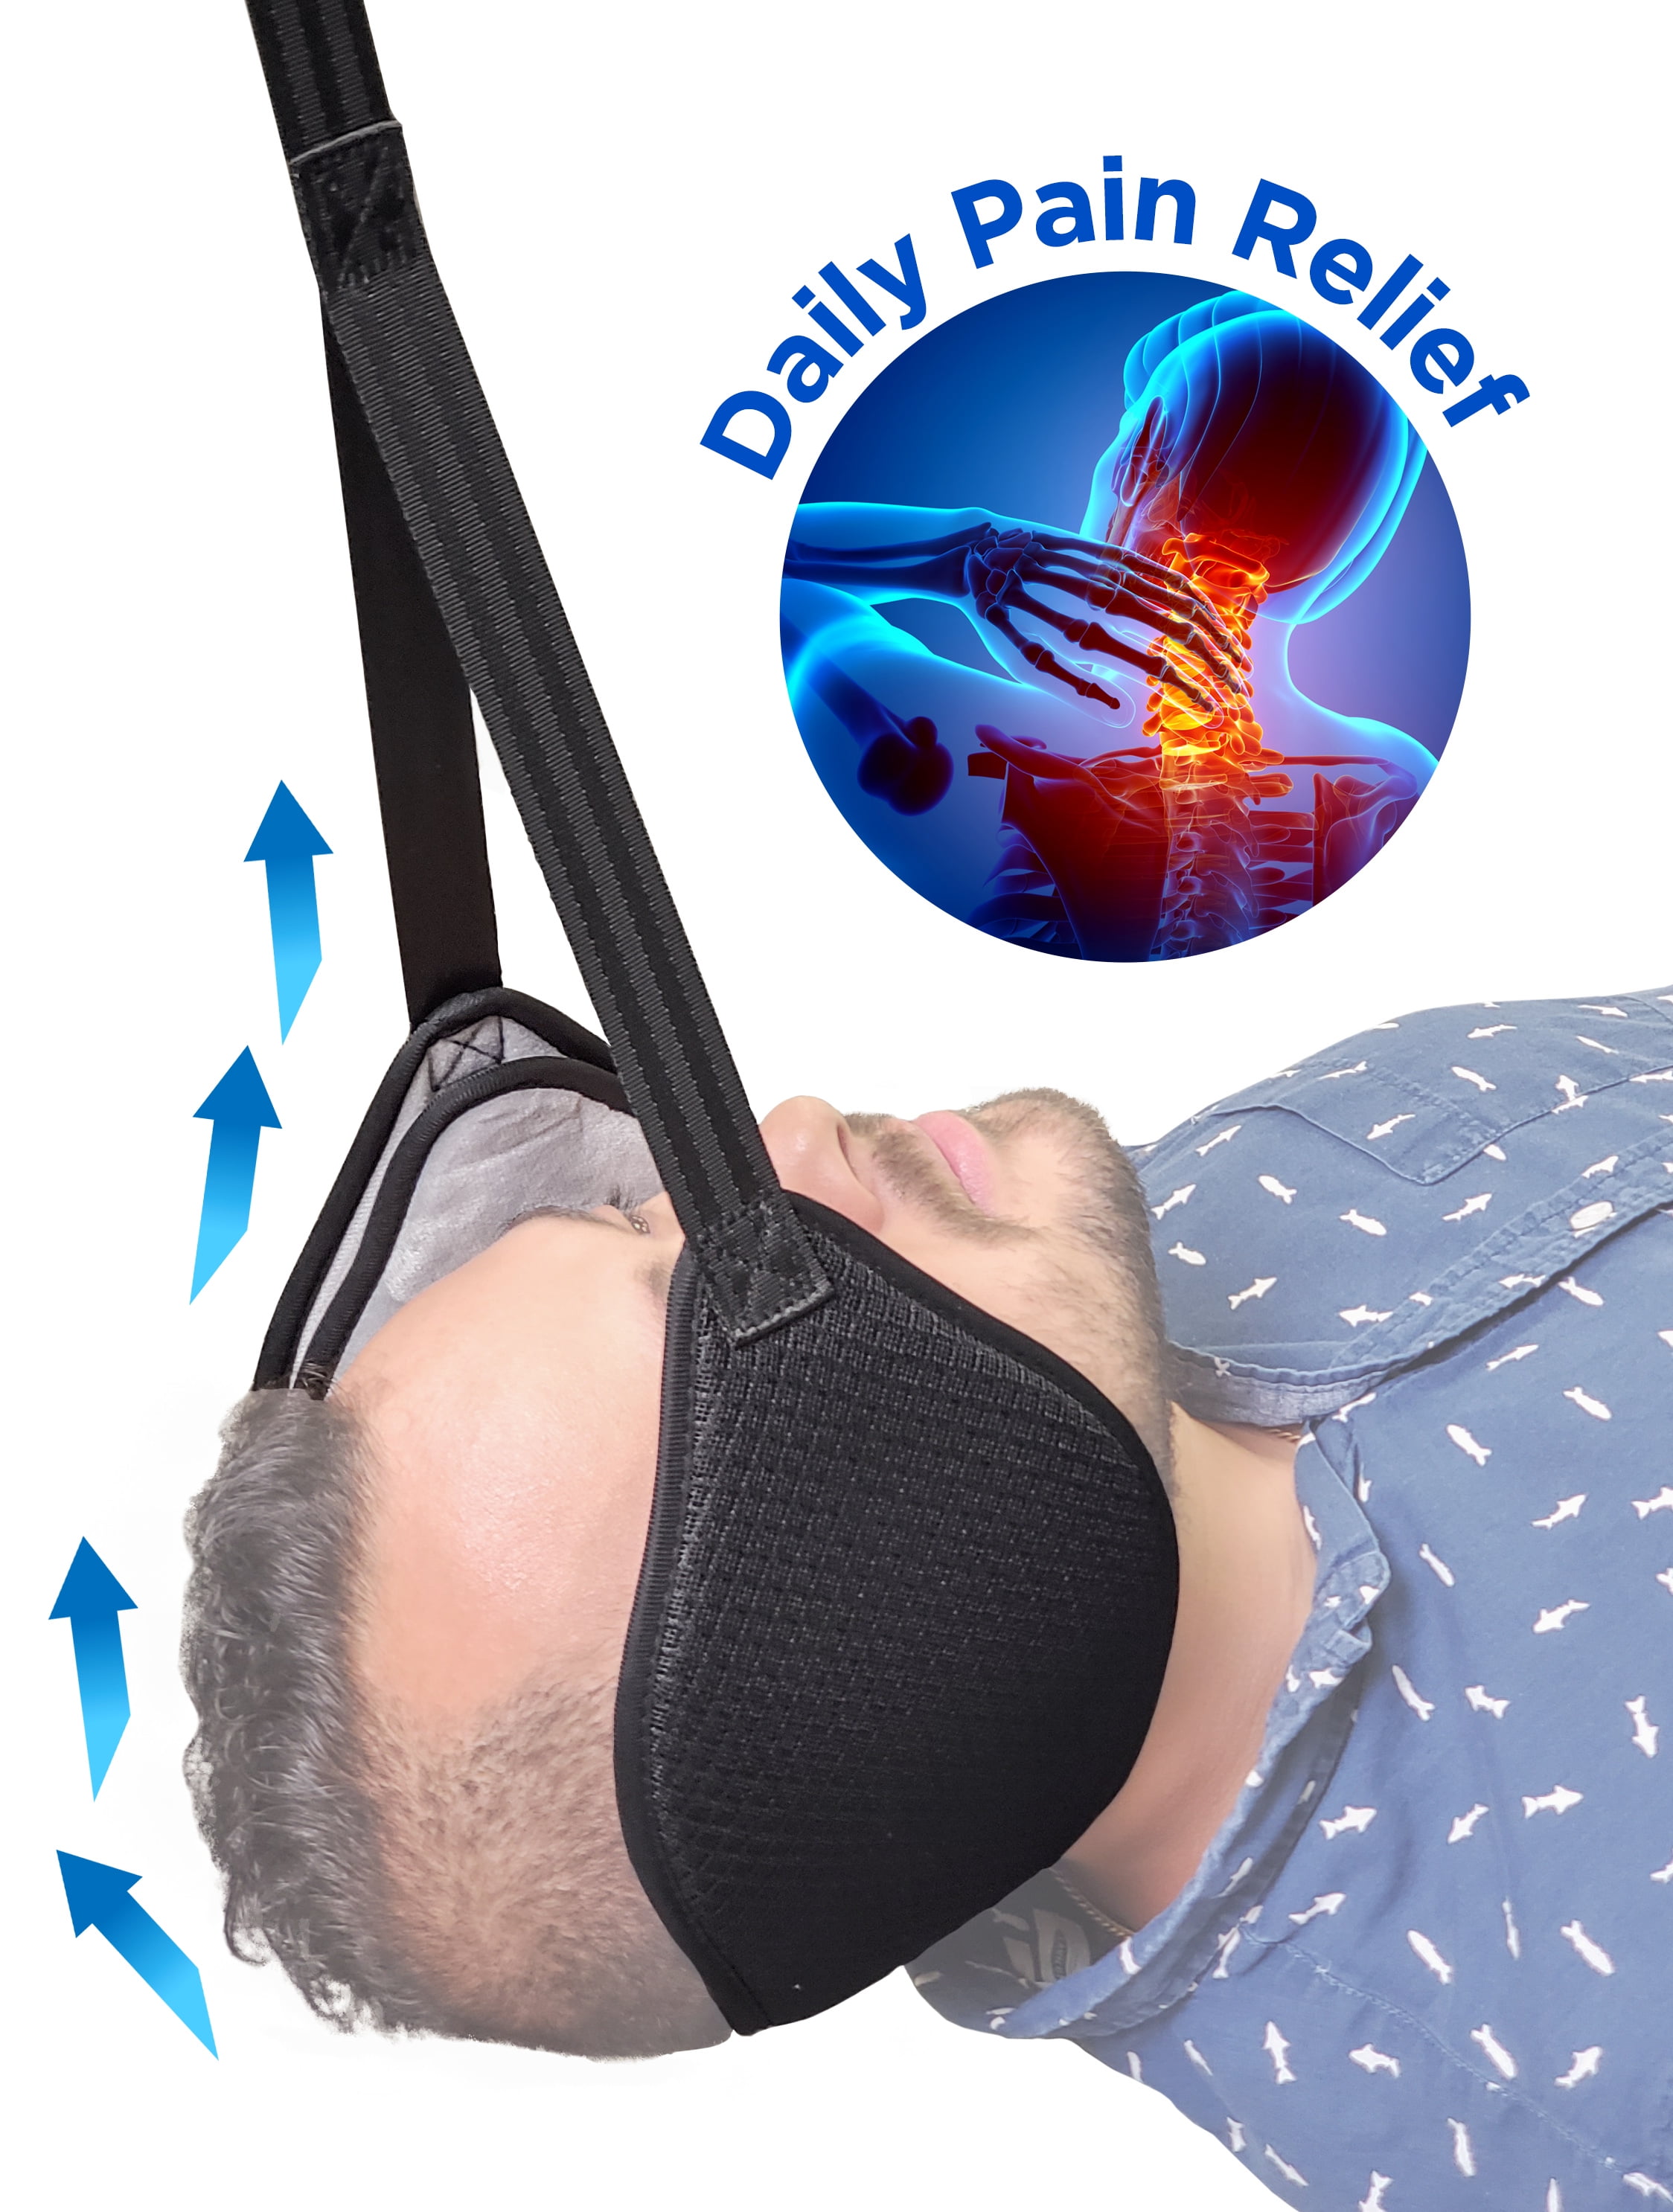 Relaxn Neck Hammock, Premium Neck Stretcher for Pain Relief & Muscle  Relaxation 